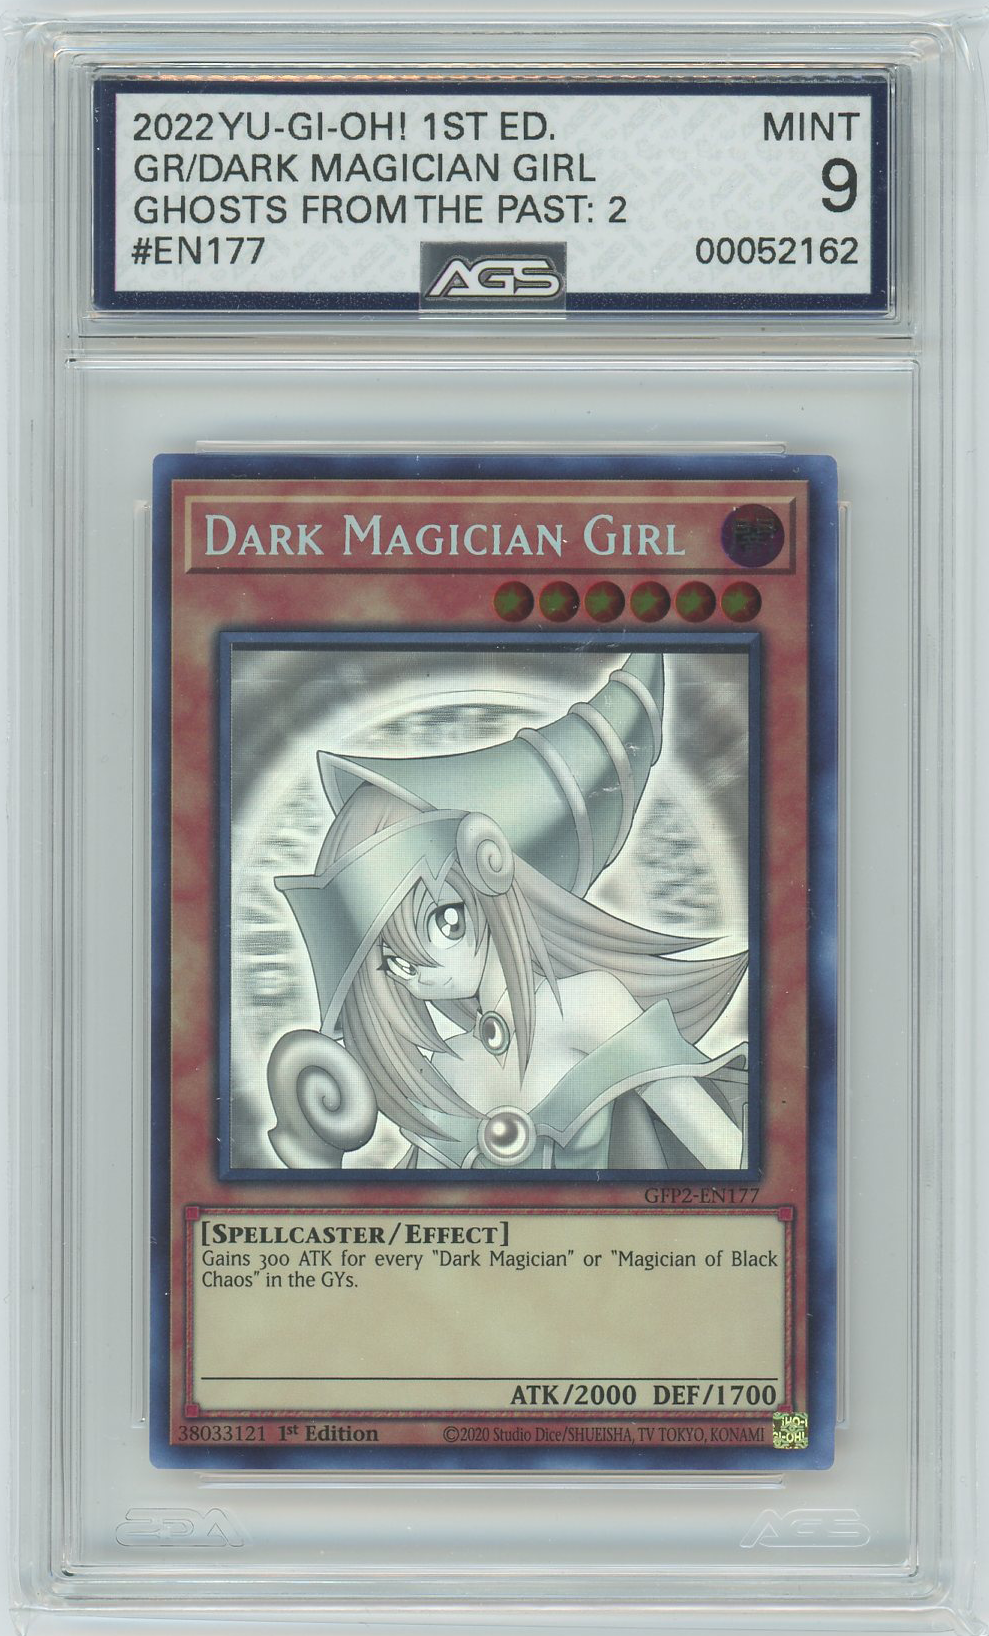 AGS (MINT 9) Dark Magician Girl #EN177 - Ghosts From The Past The 2nd Haunting (#00052162)